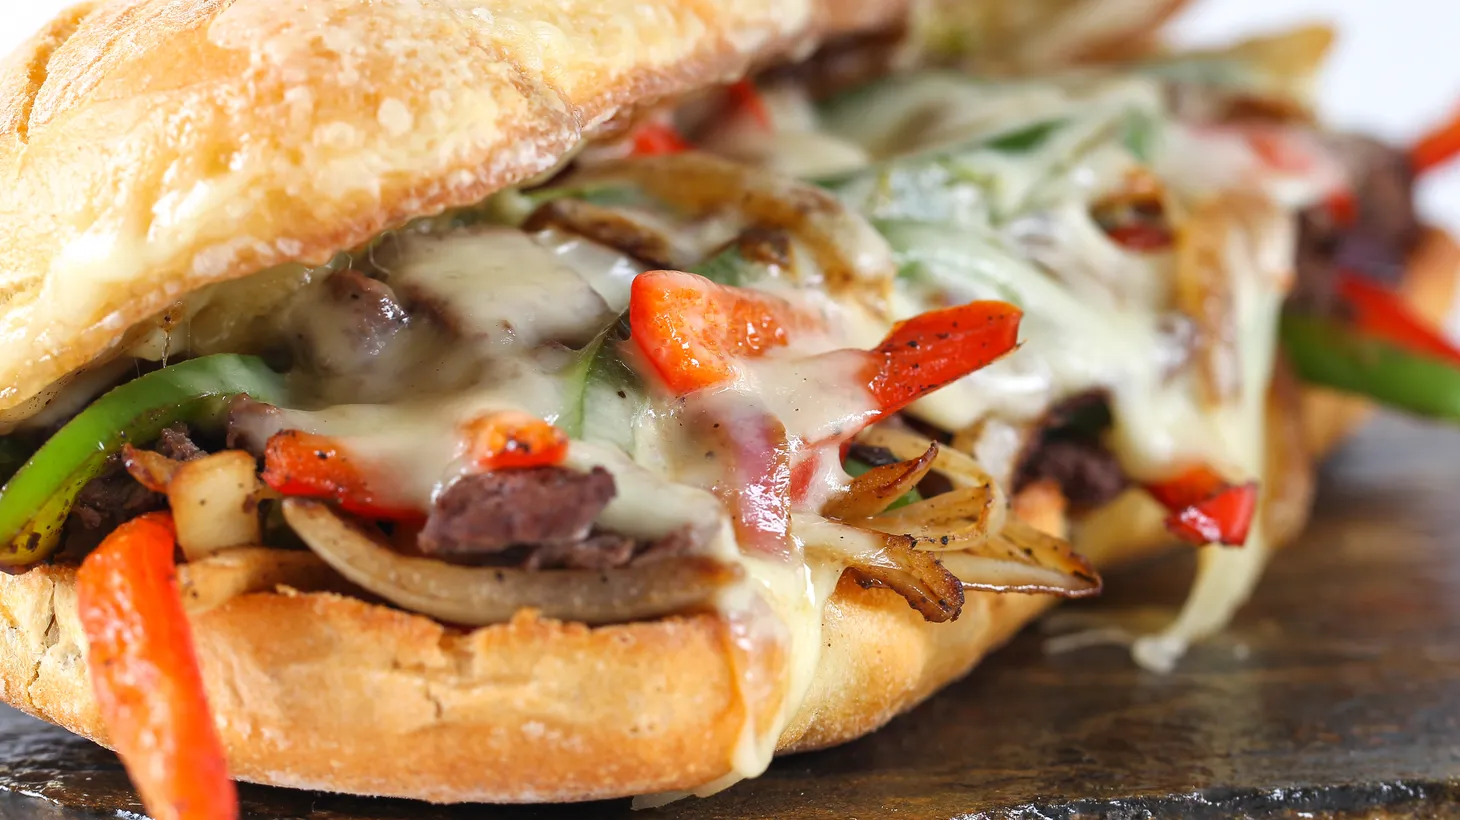 A traditional Philly Cheesesteak sandwich is topped with onions, mushrooms and provolone.